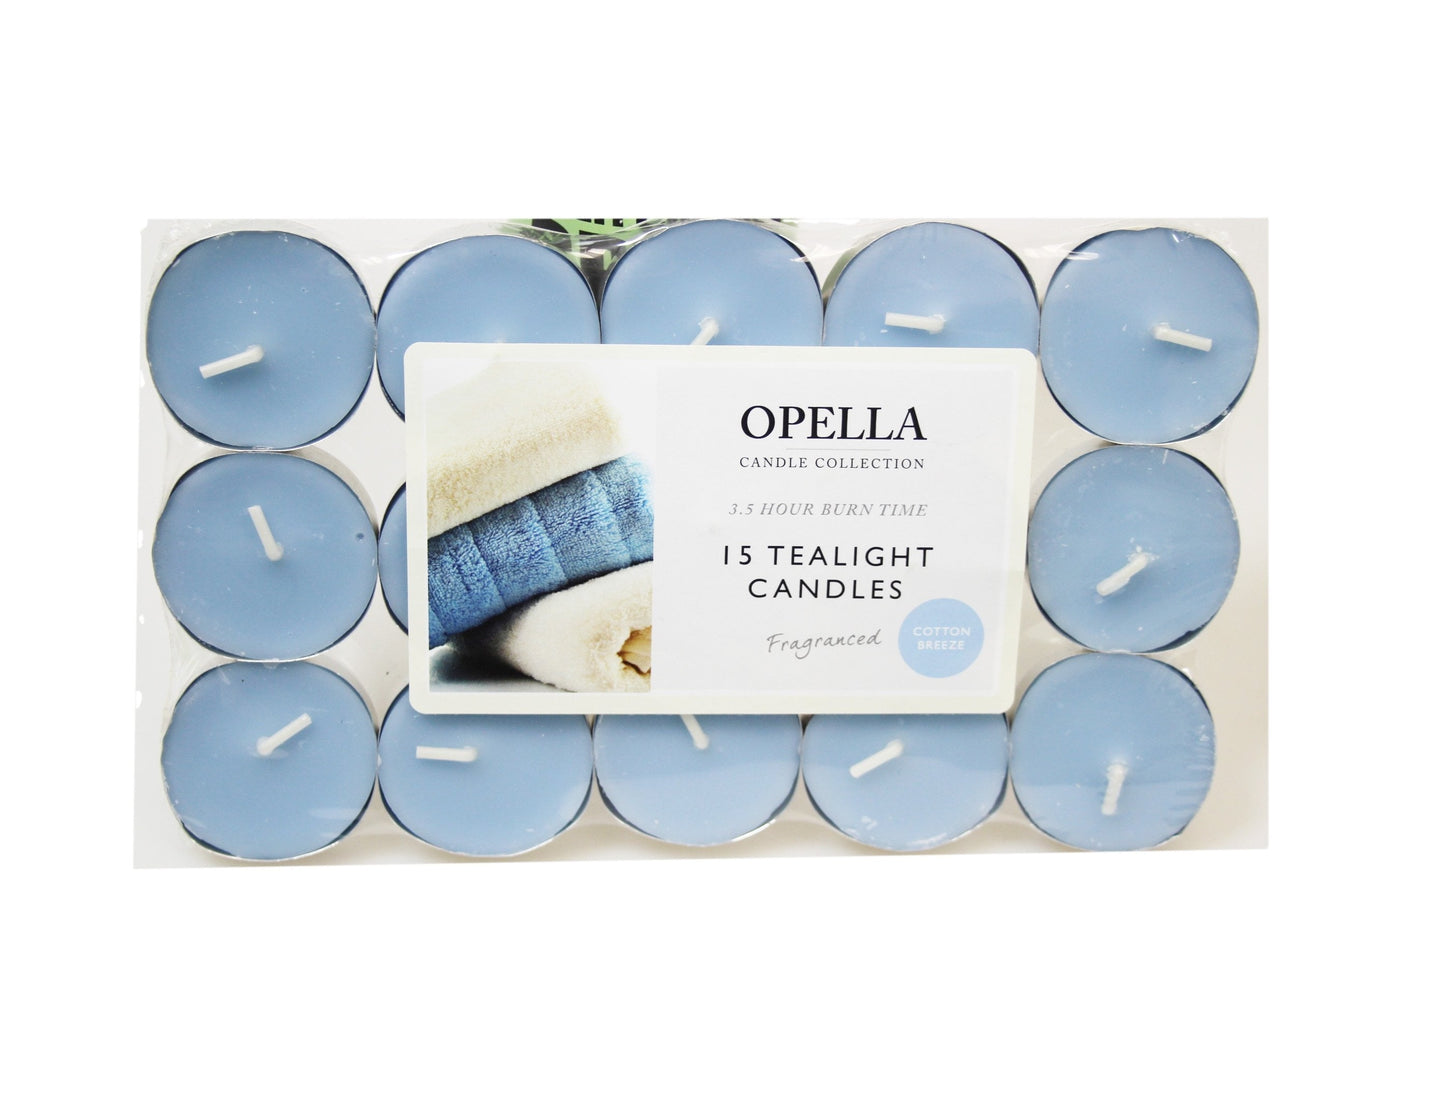 Beautifully Scented Opella Cotton Breeze 12 Tealight Candles 3.5 Hour Burn Time CD001C (Parcel Rate)